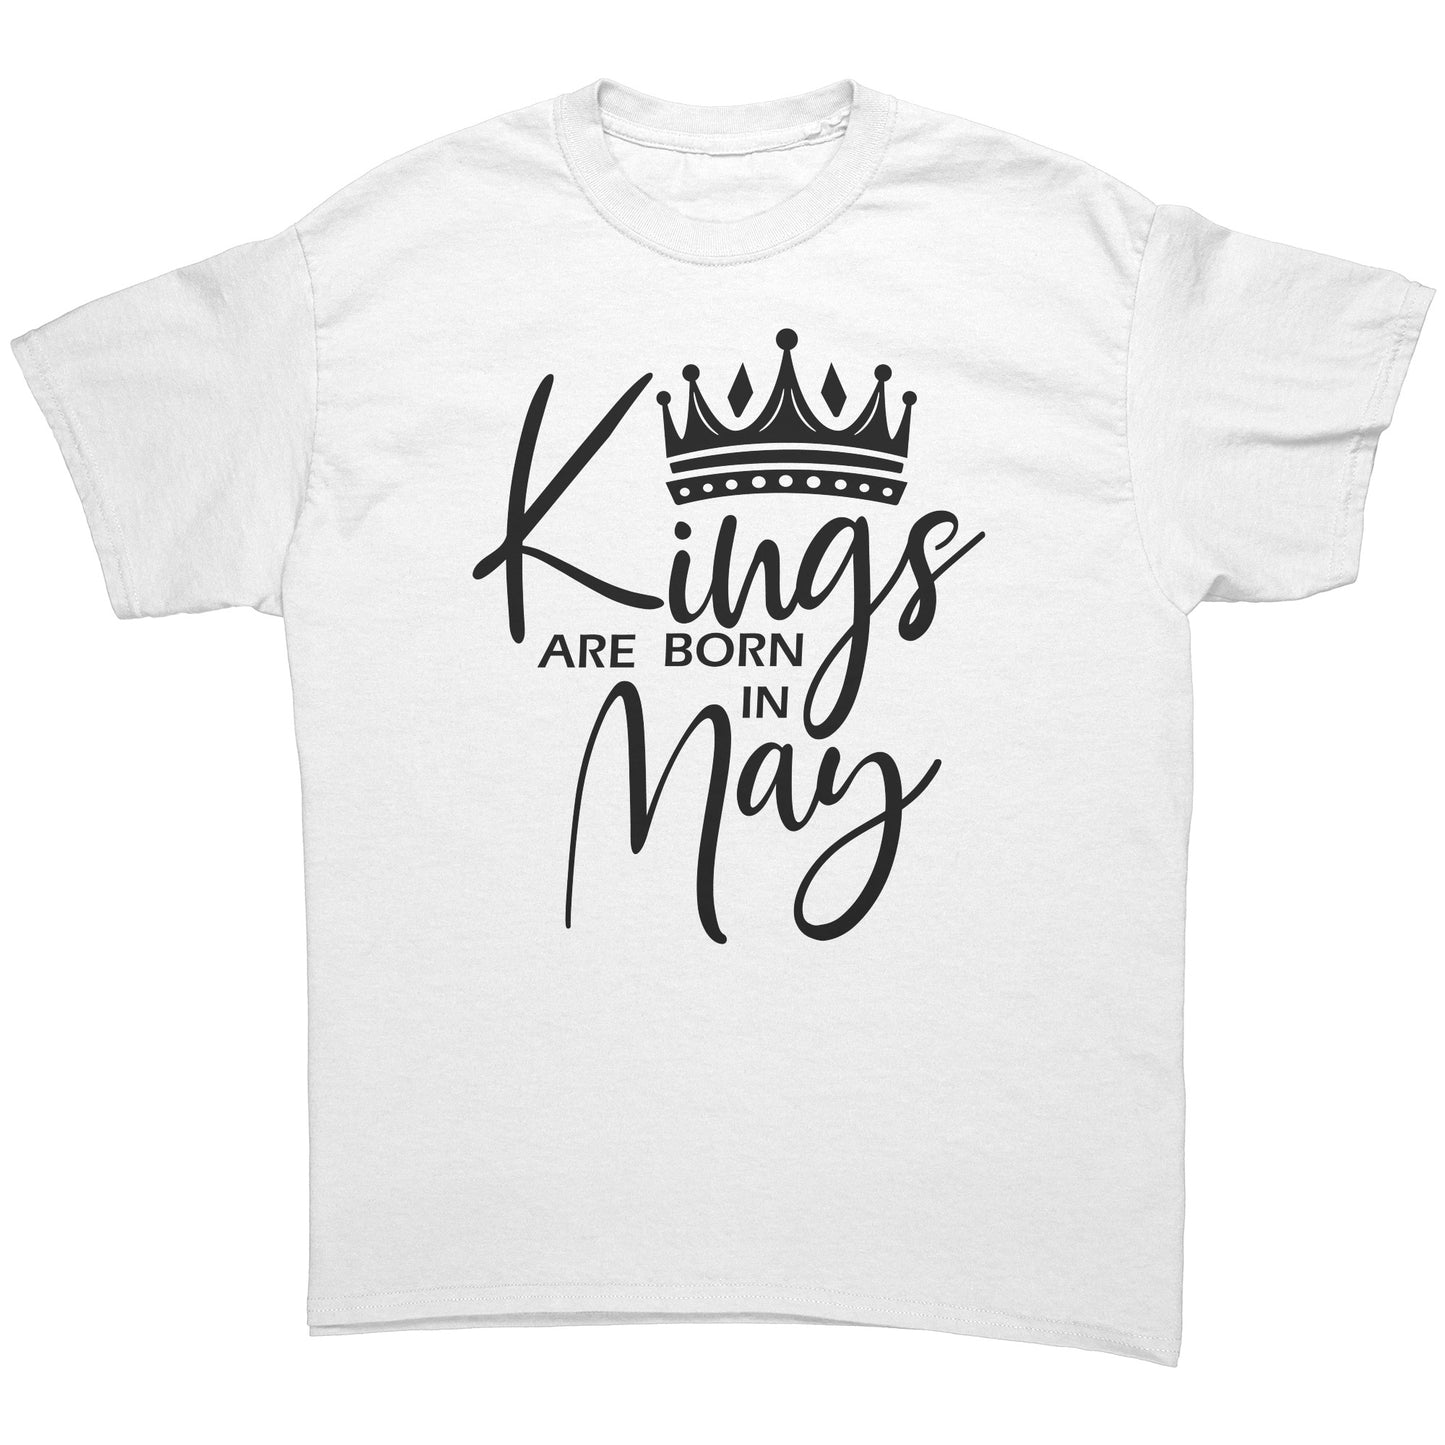 Kings Are Born In May Tee